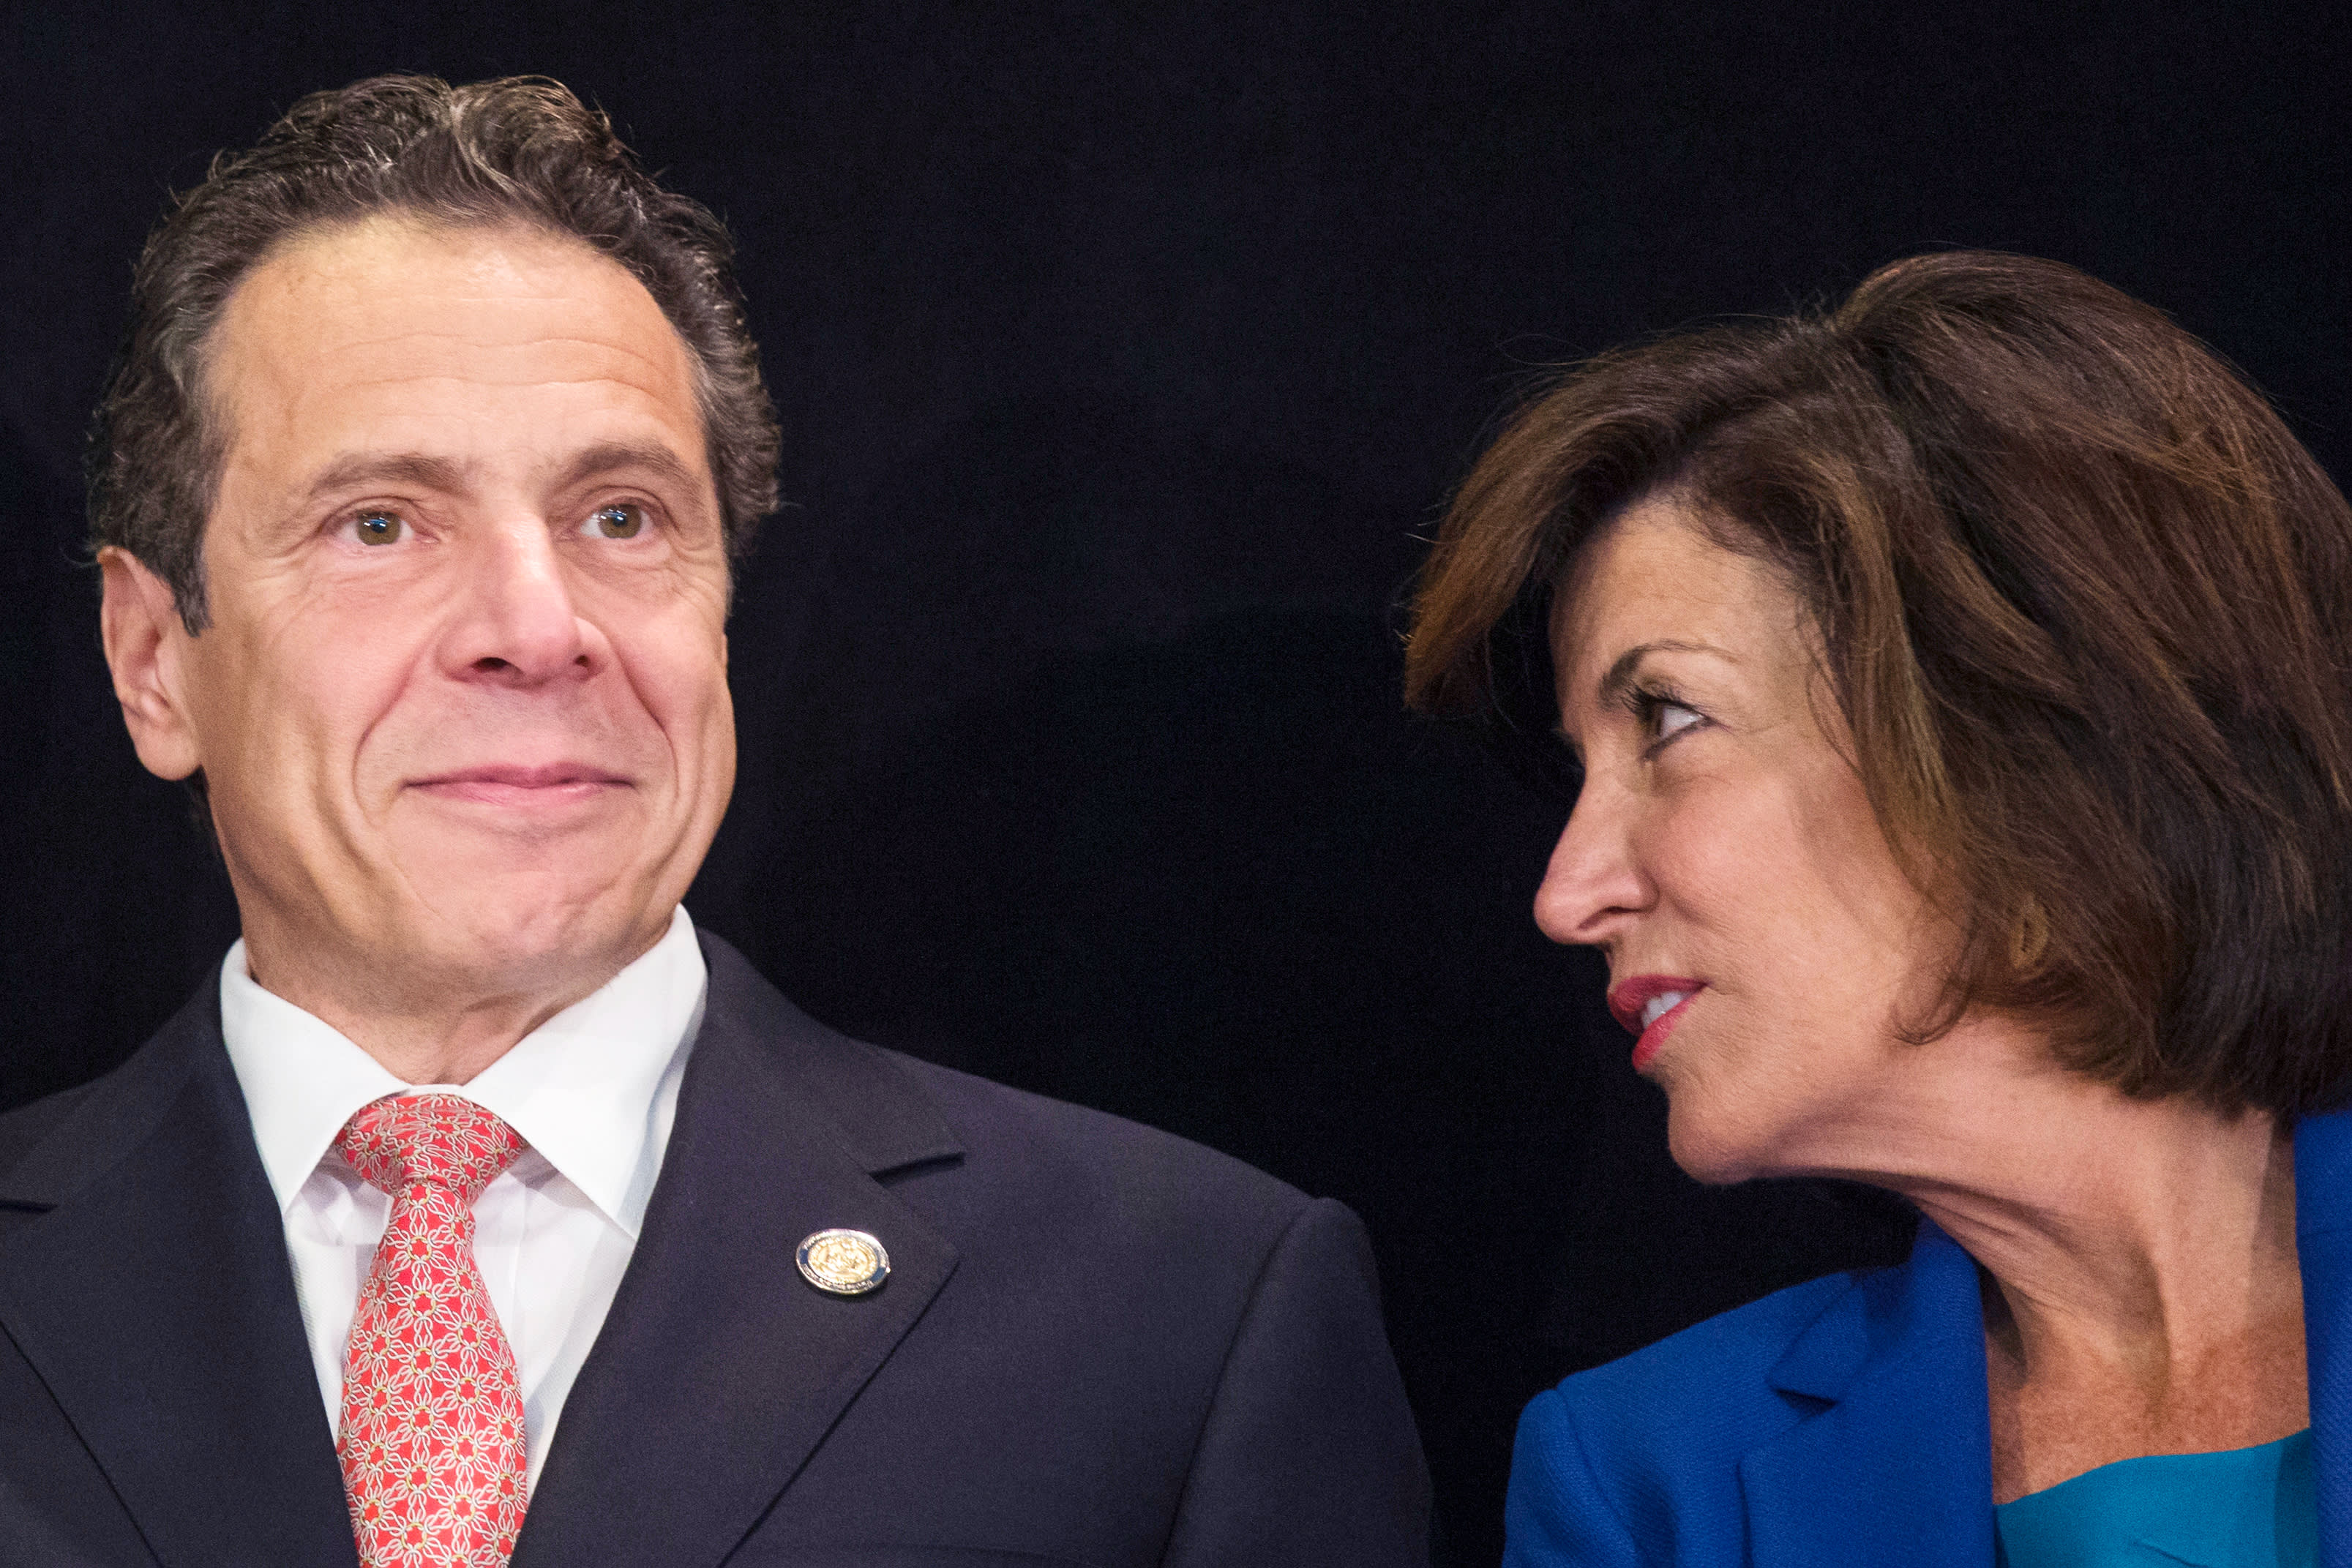 Cuomo’s sexual harassment accusers will be heard, says Hochul